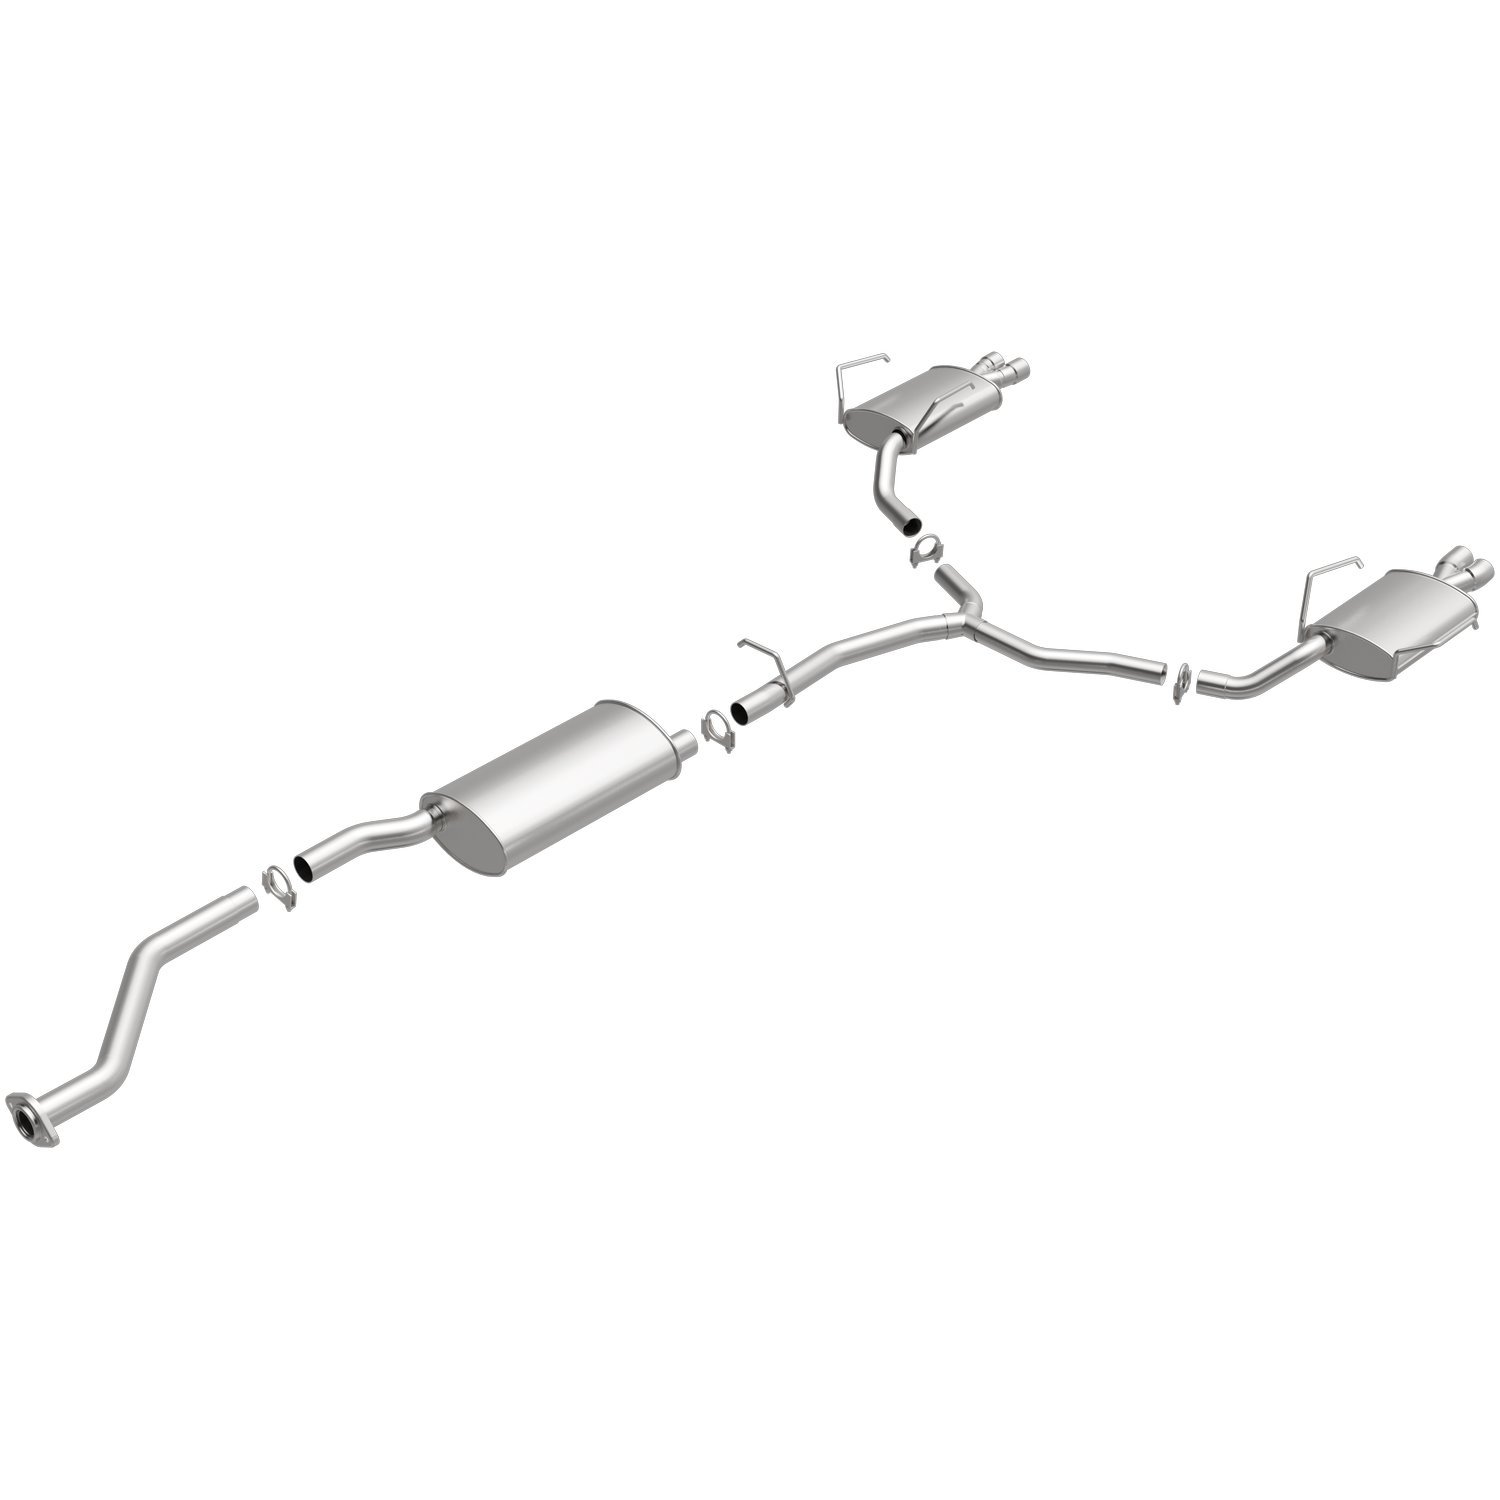 Direct-Fit Exhaust Kit, 2007-2008 GM Acadia/Outlook 3.6L